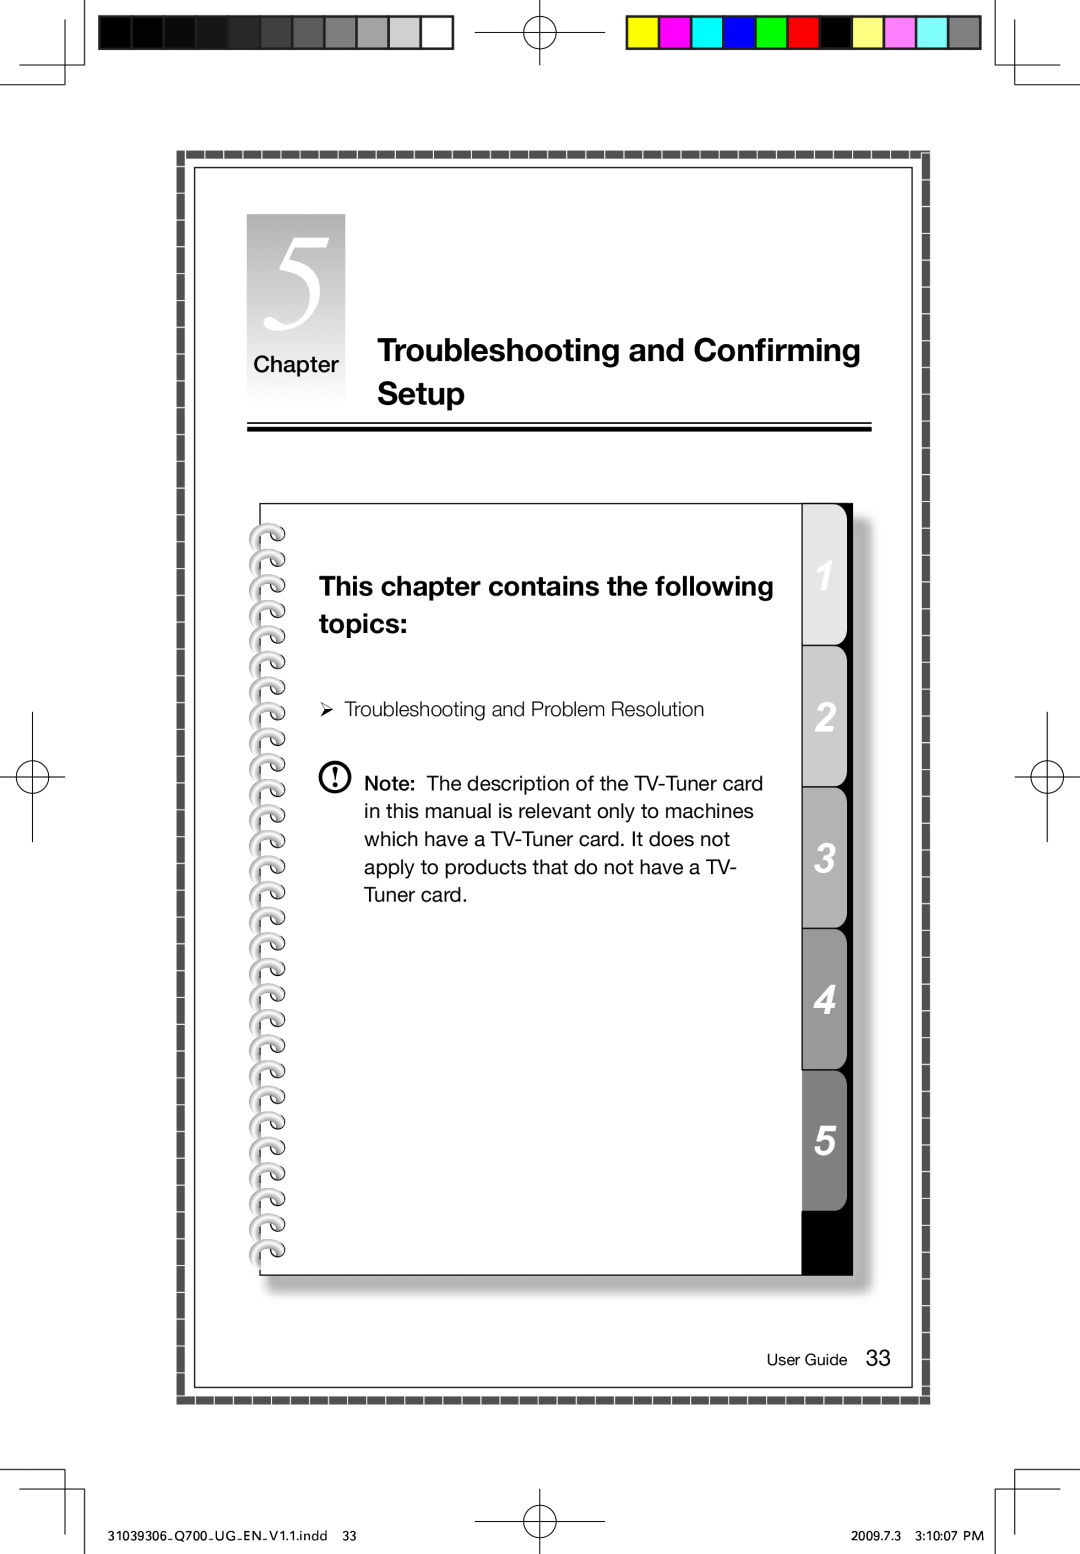 Lenovo Q700 manual Setup, Chapter, Troubleshooting and Confirming, This chapter contains the following topics, User Guide 